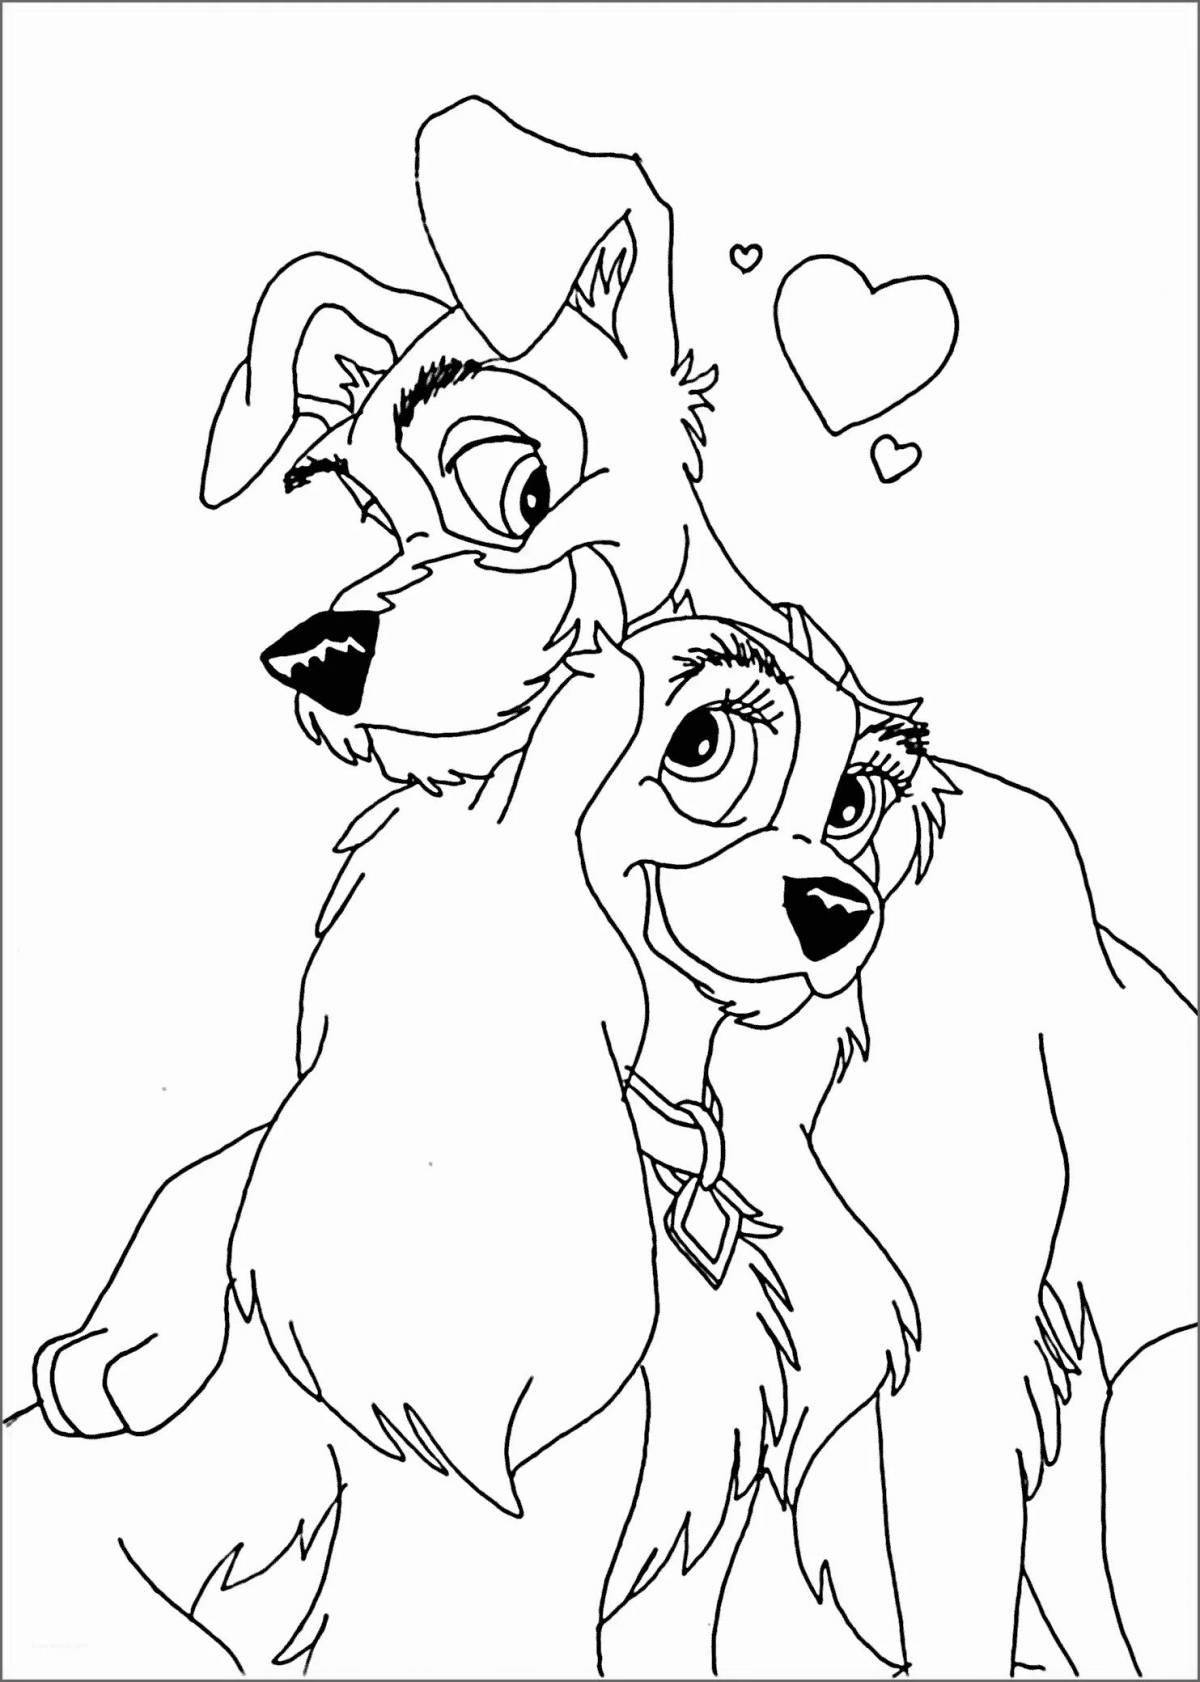 Delightful fox and dog coloring book